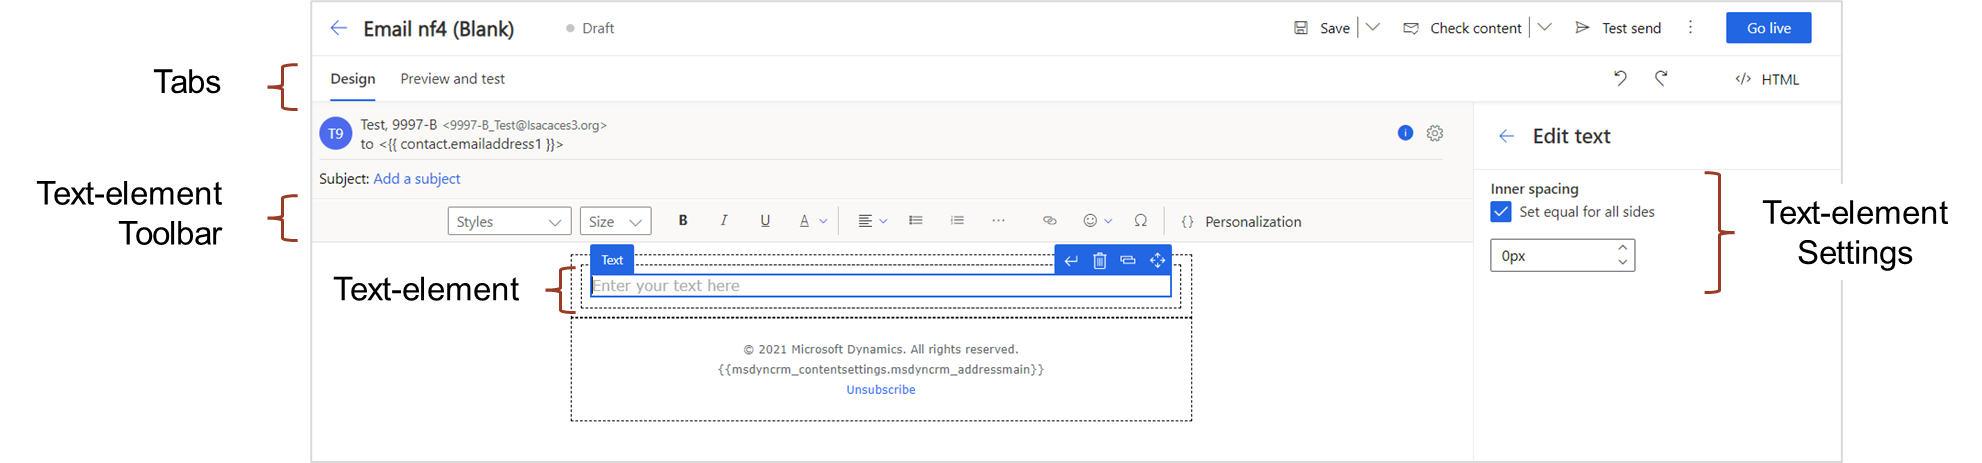 Image shows text elements and the text element toolbar in the email you are designing.